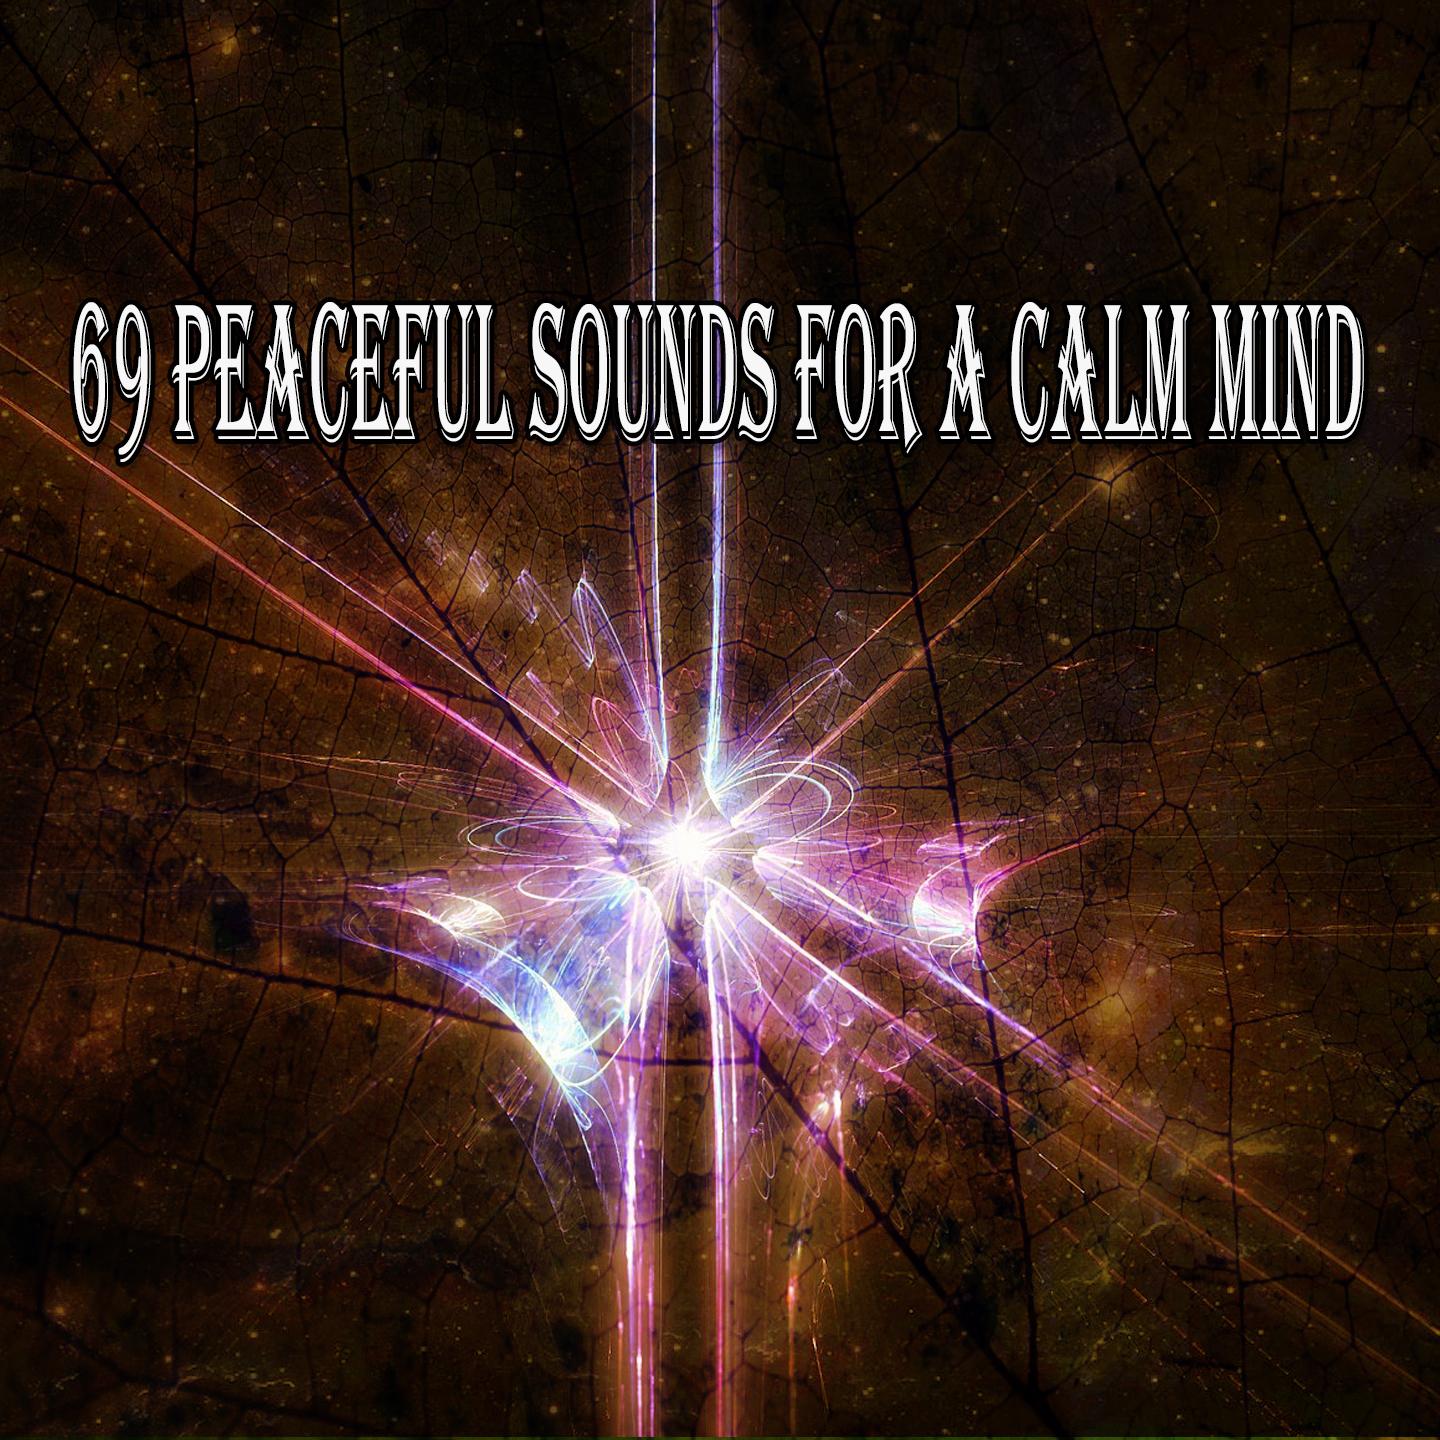 69 Peaceful Sounds for a Calm Mind